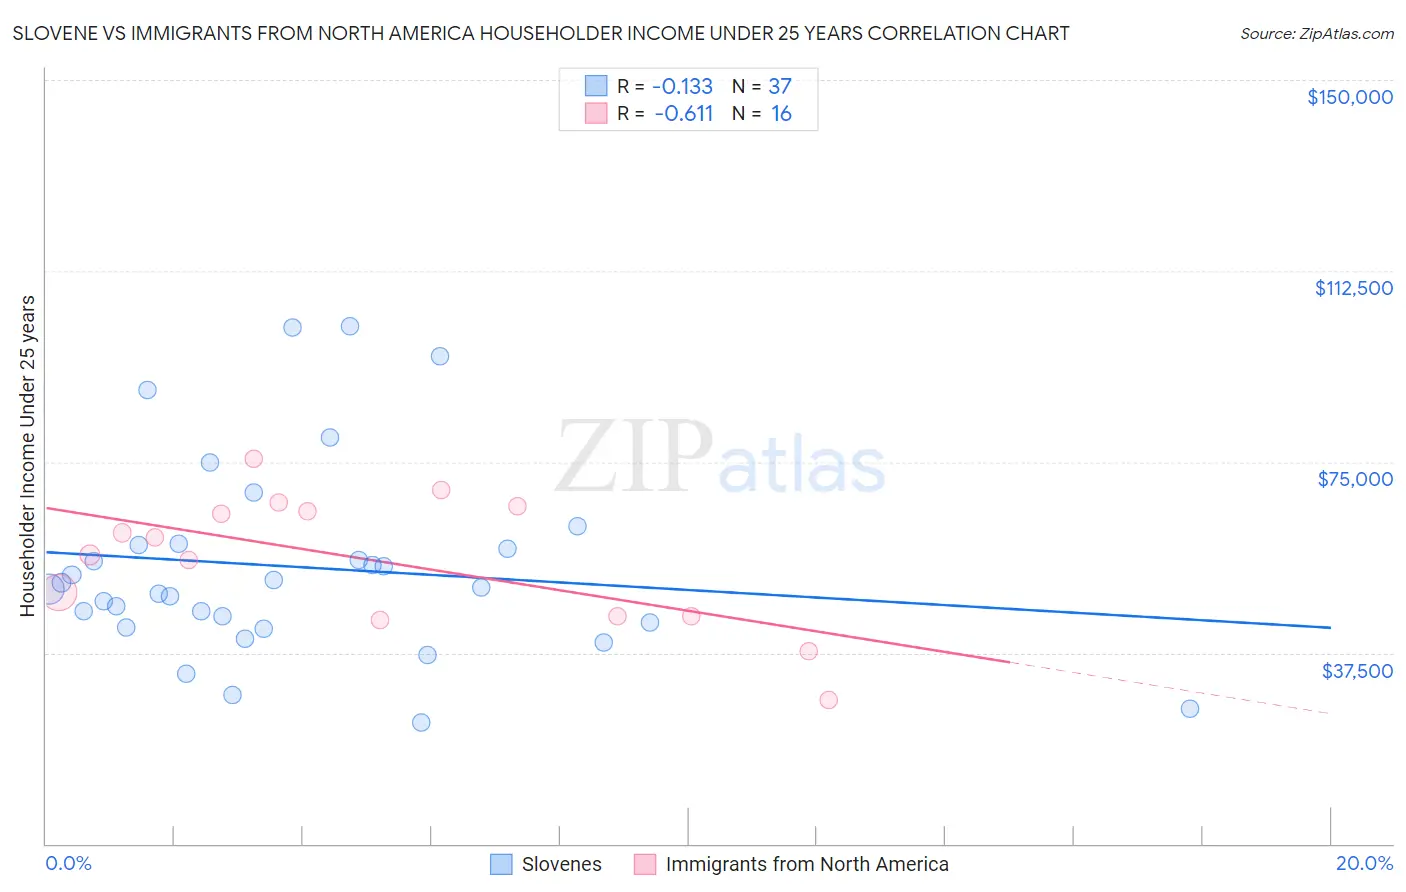 Slovene vs Immigrants from North America Householder Income Under 25 years